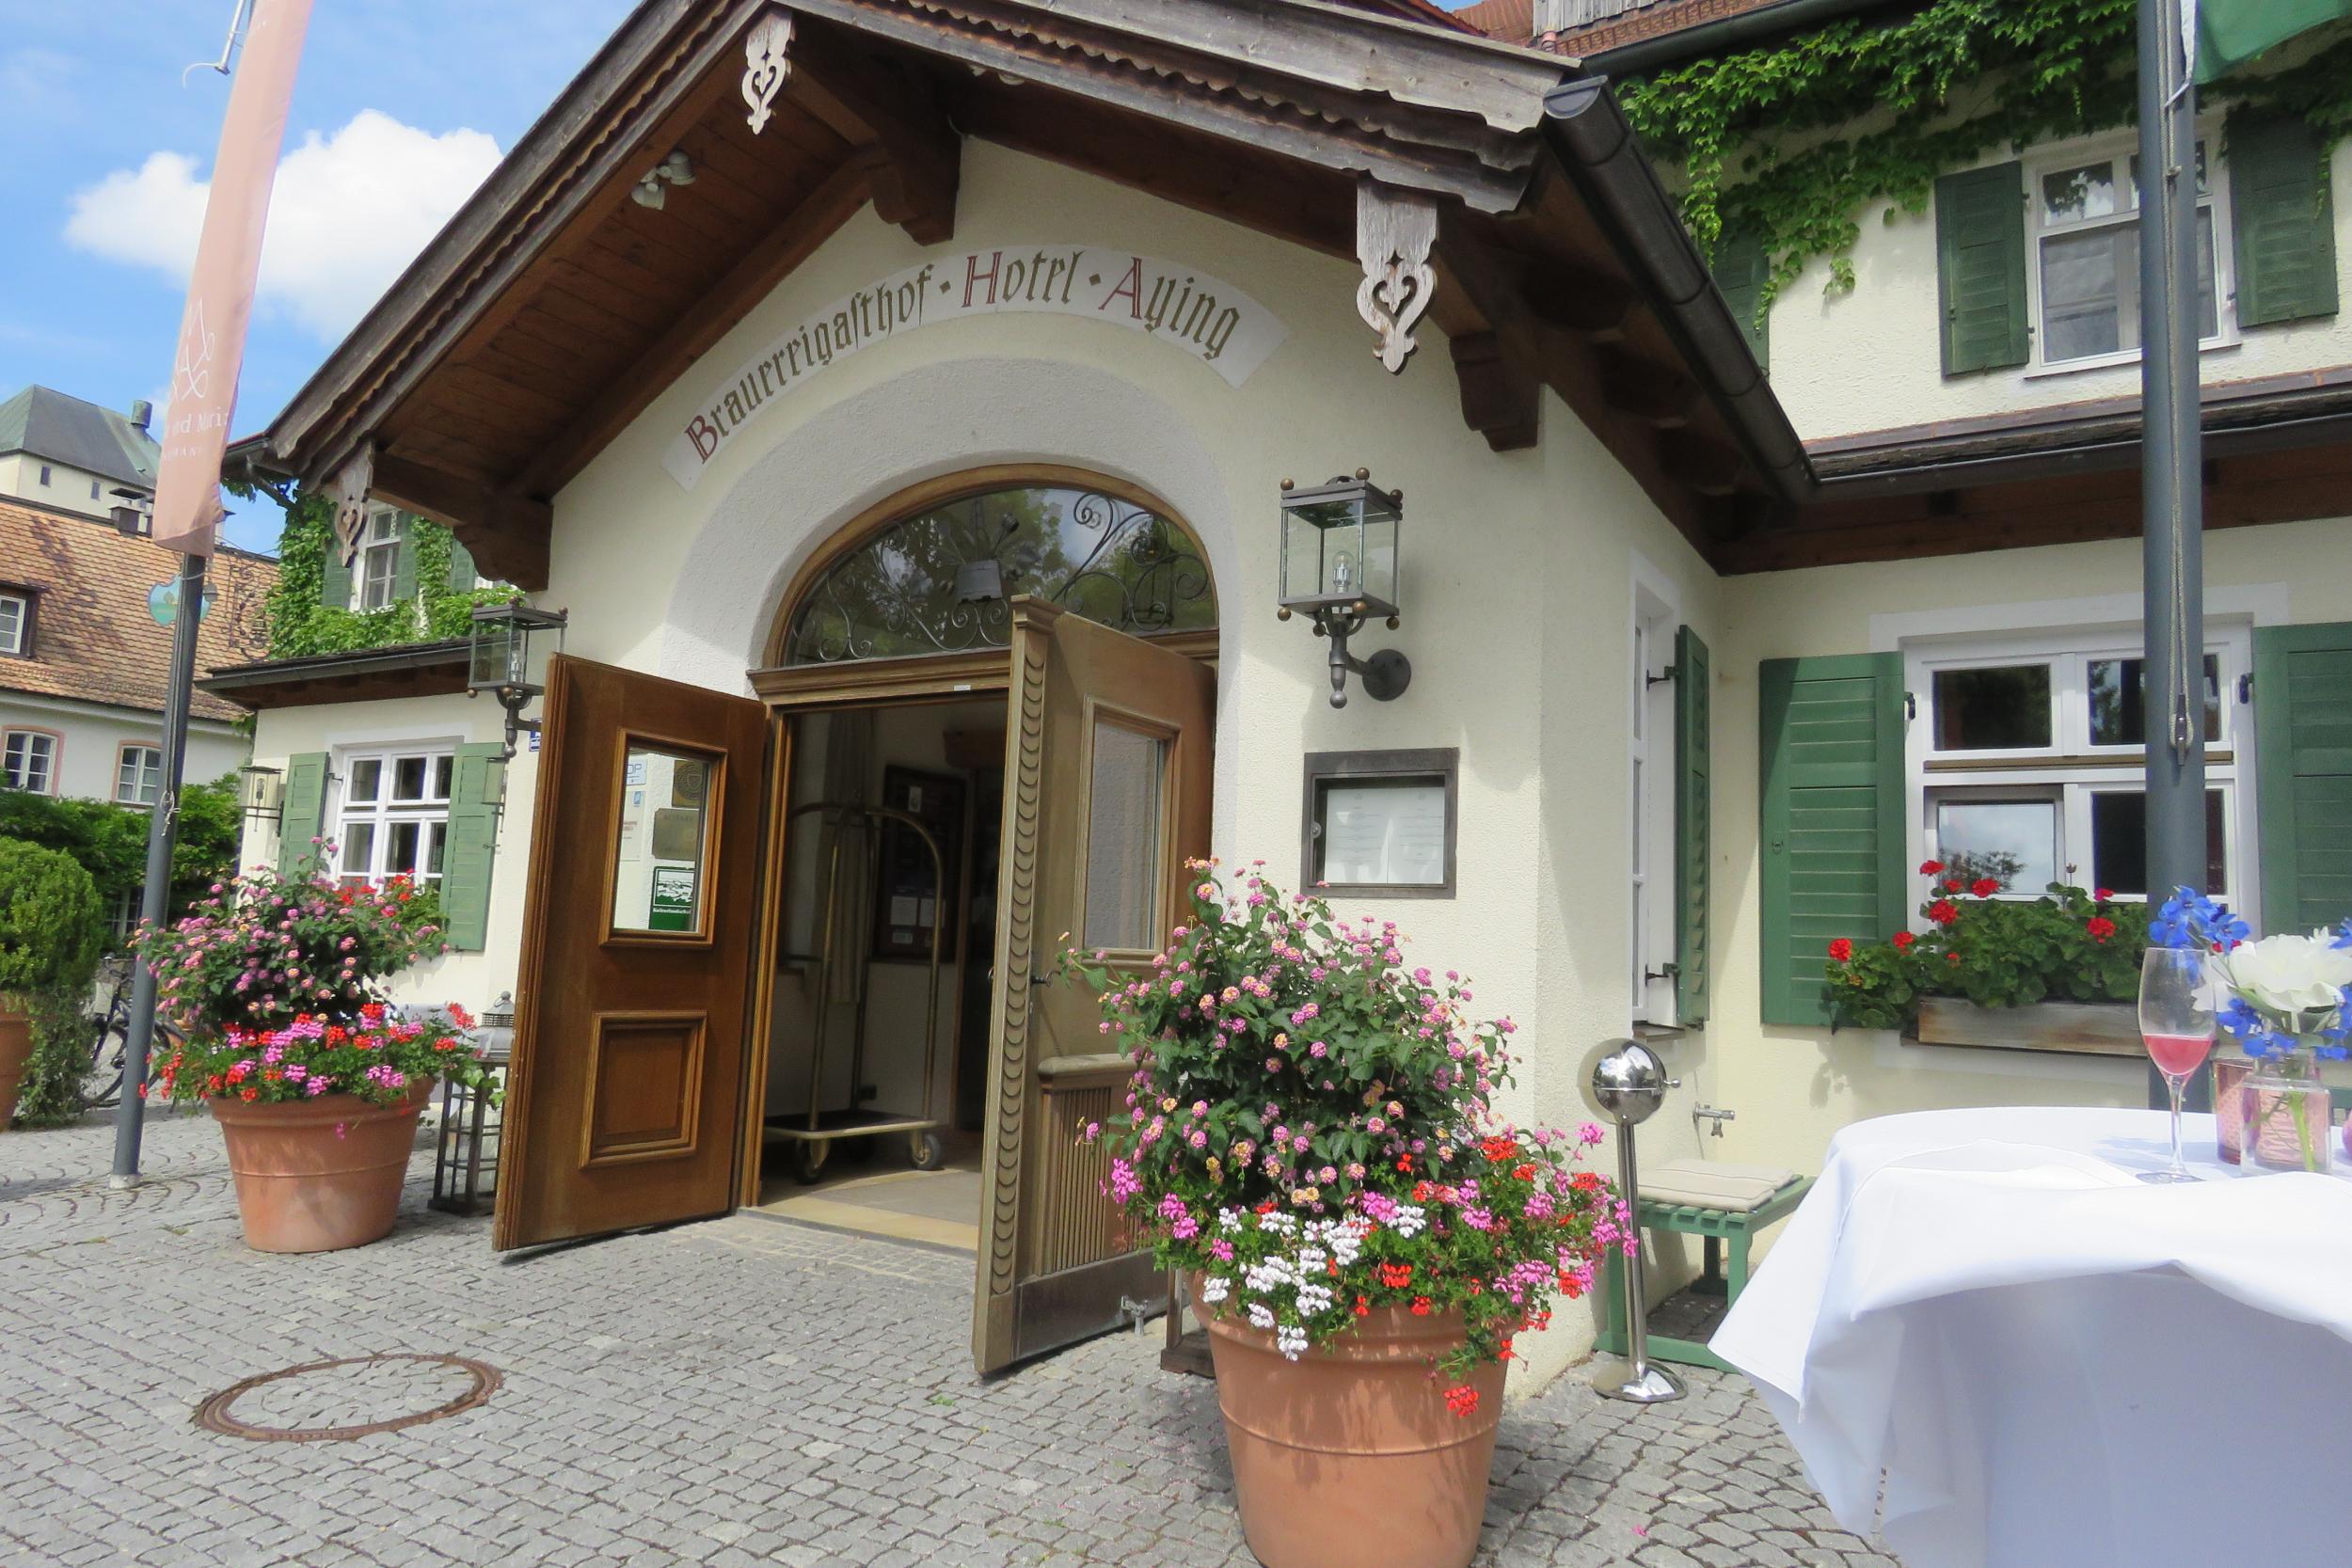 Brauerei Ayinger offers fine dining and first-class beers